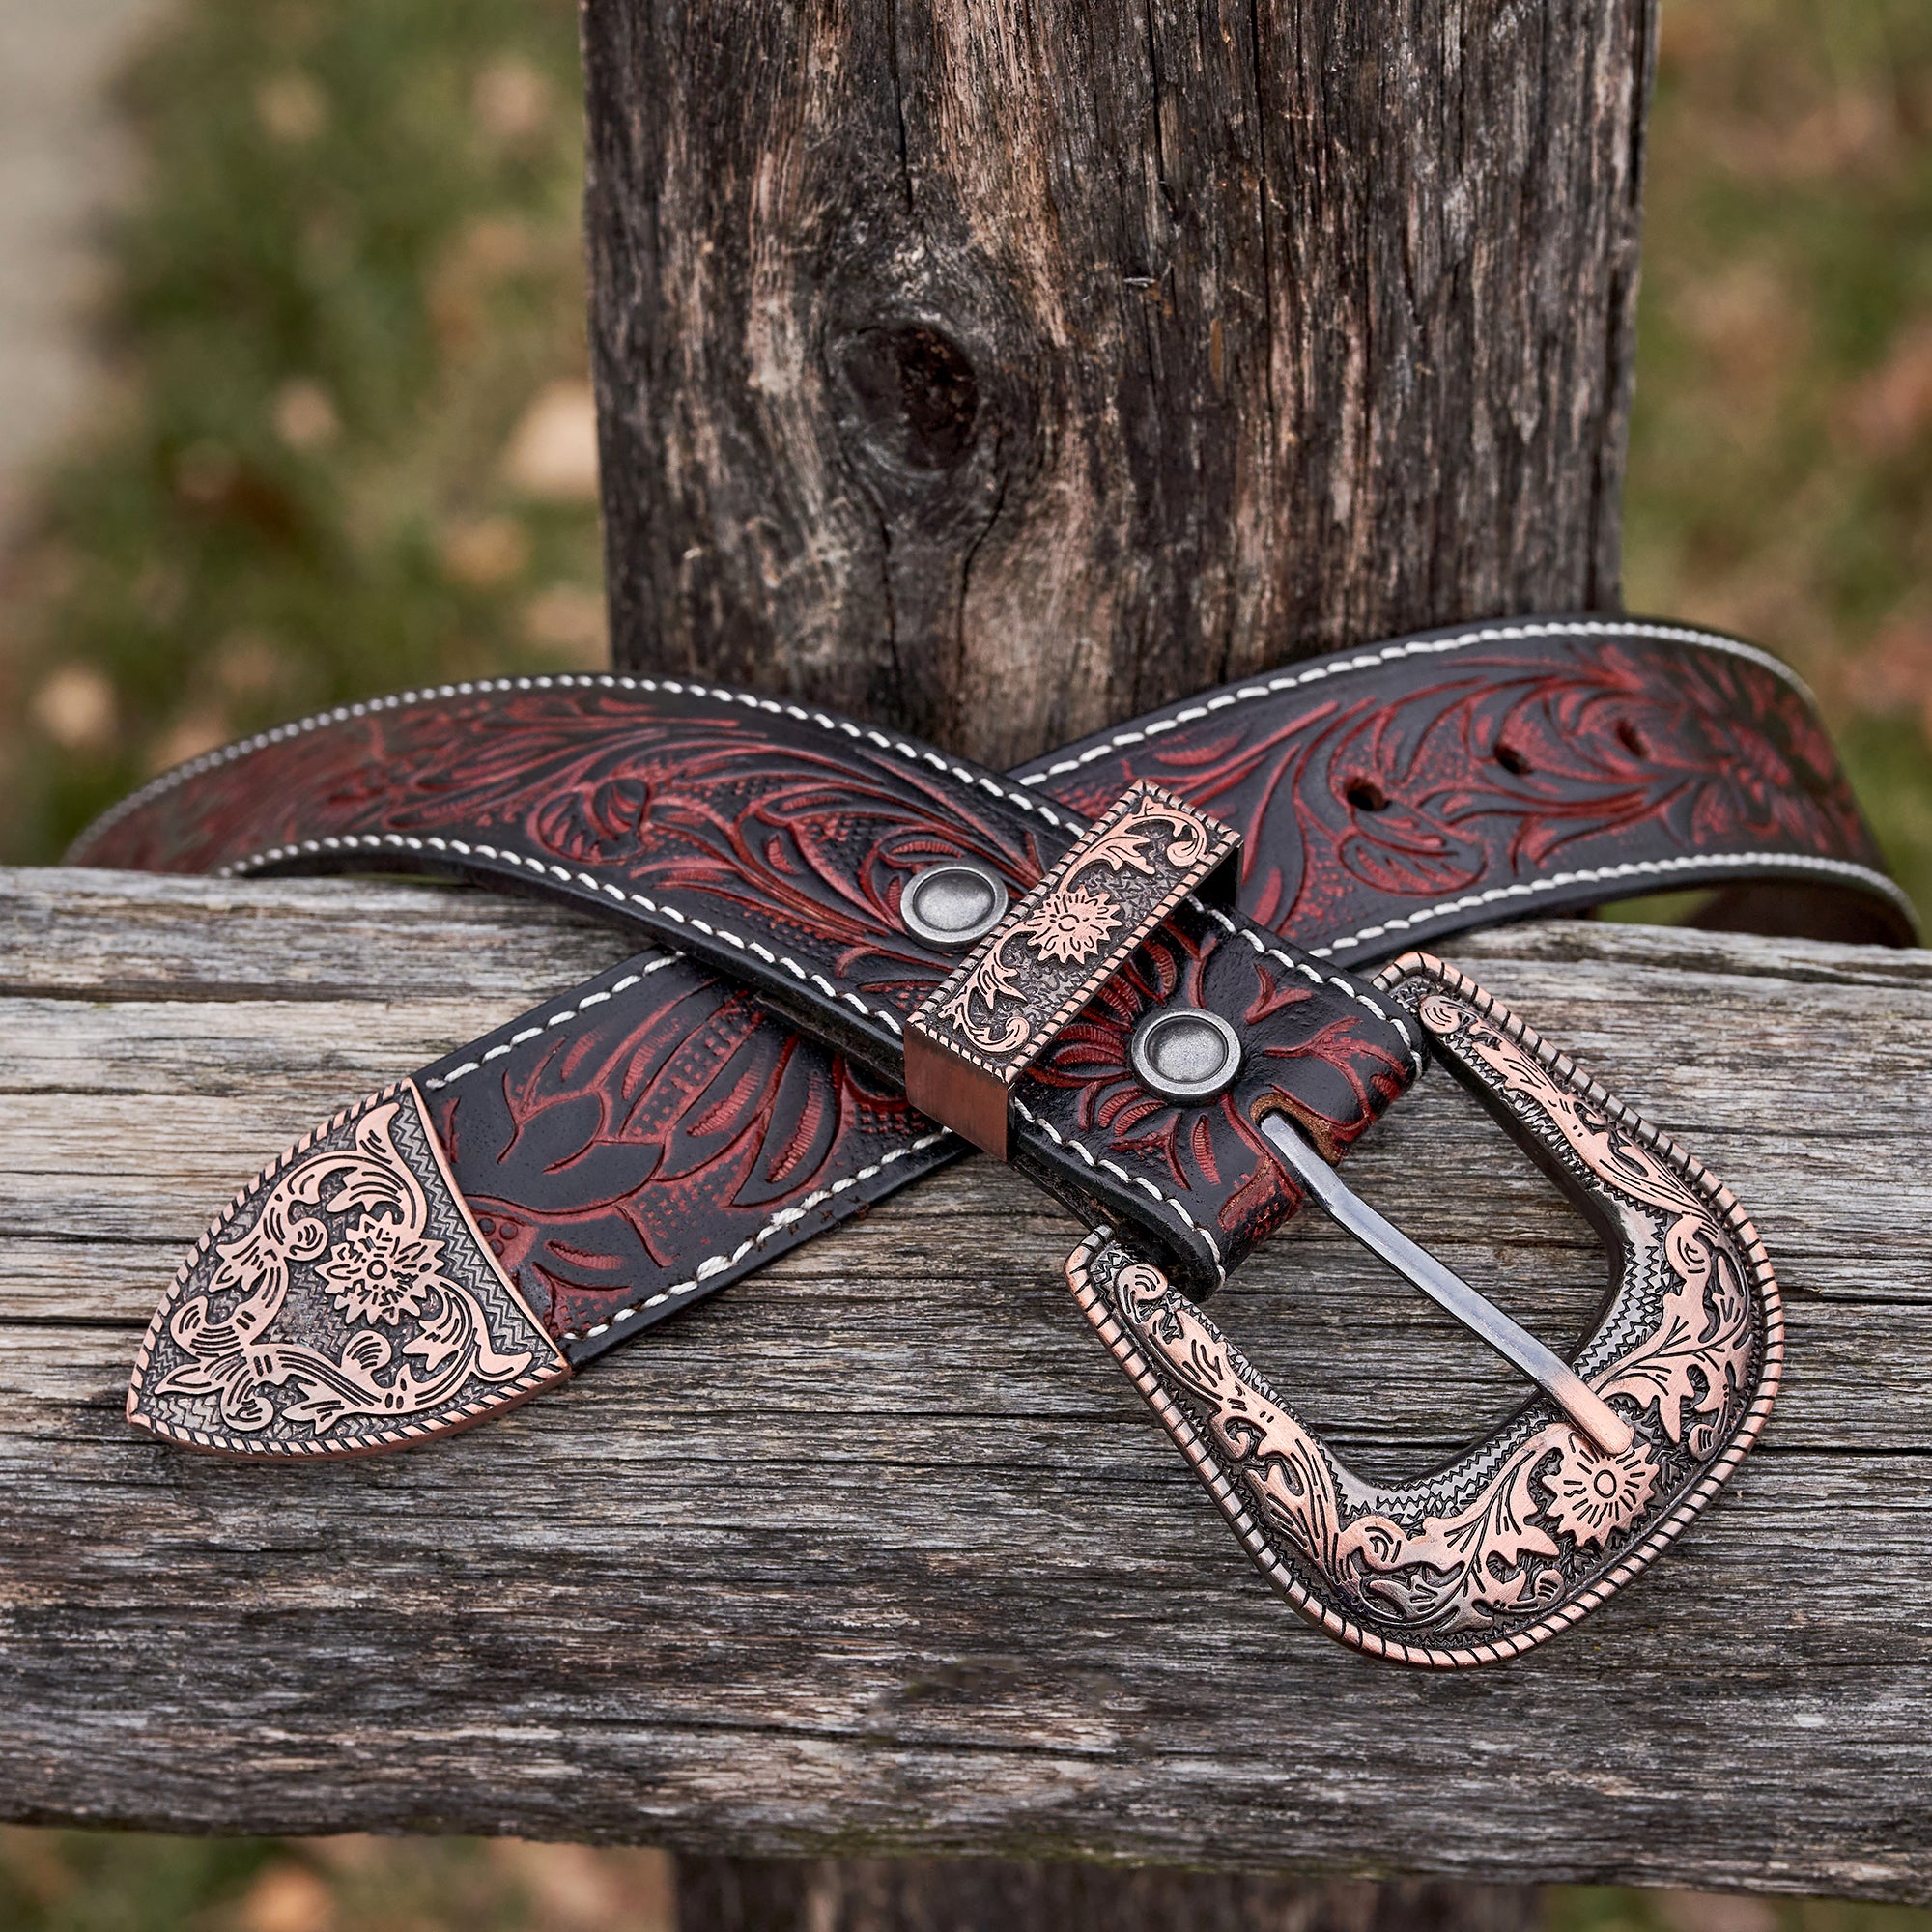 Rodeo Hand Tooled Leather Belt